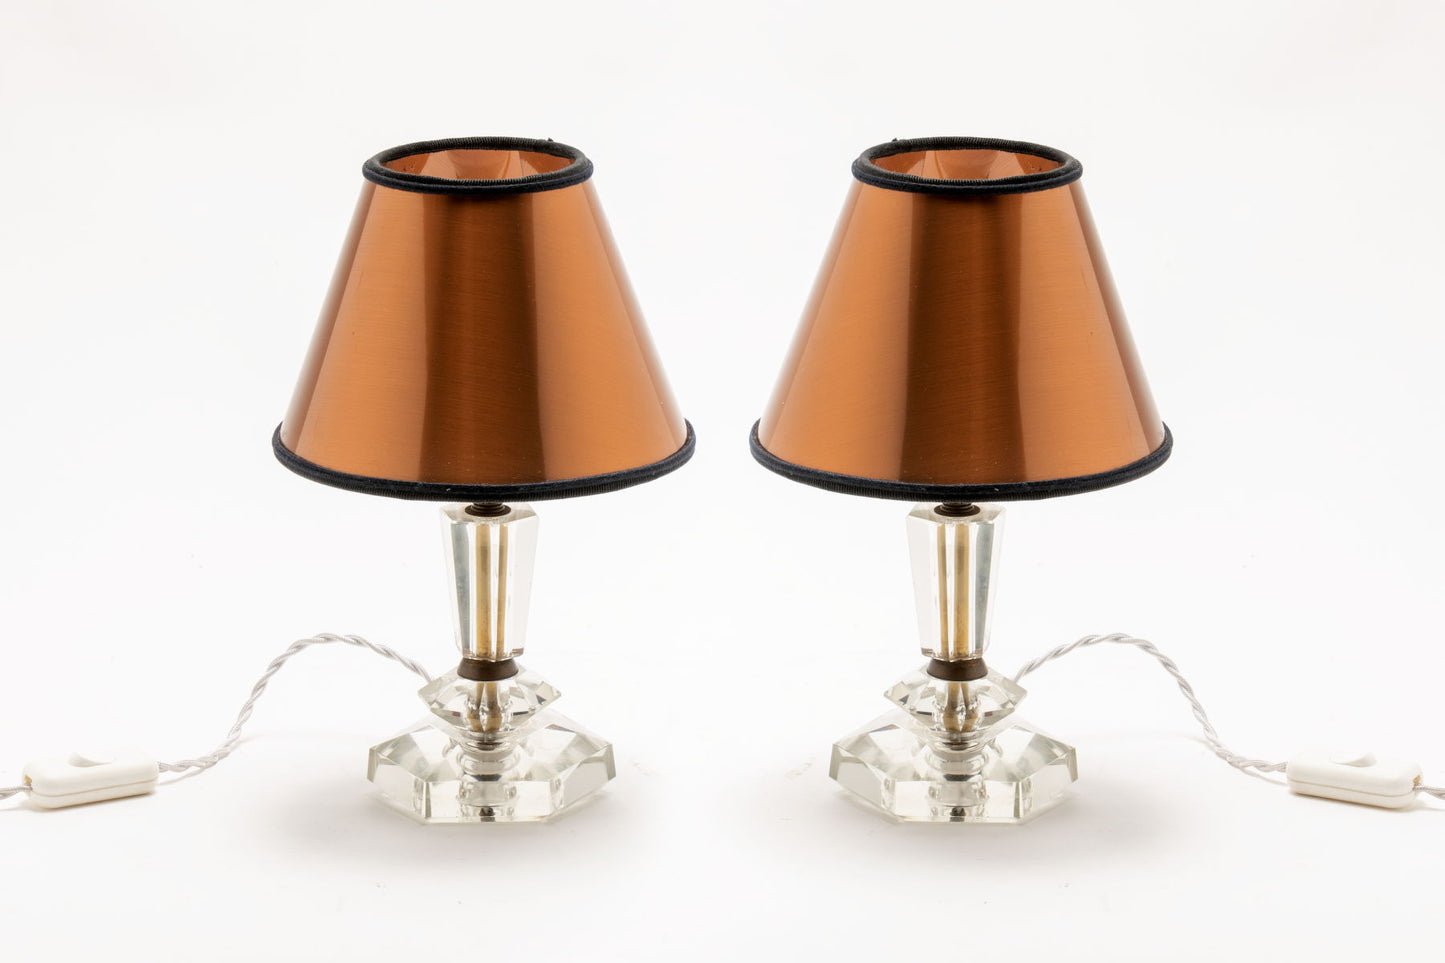 Pair of faceted glass night lamps from the 1940s